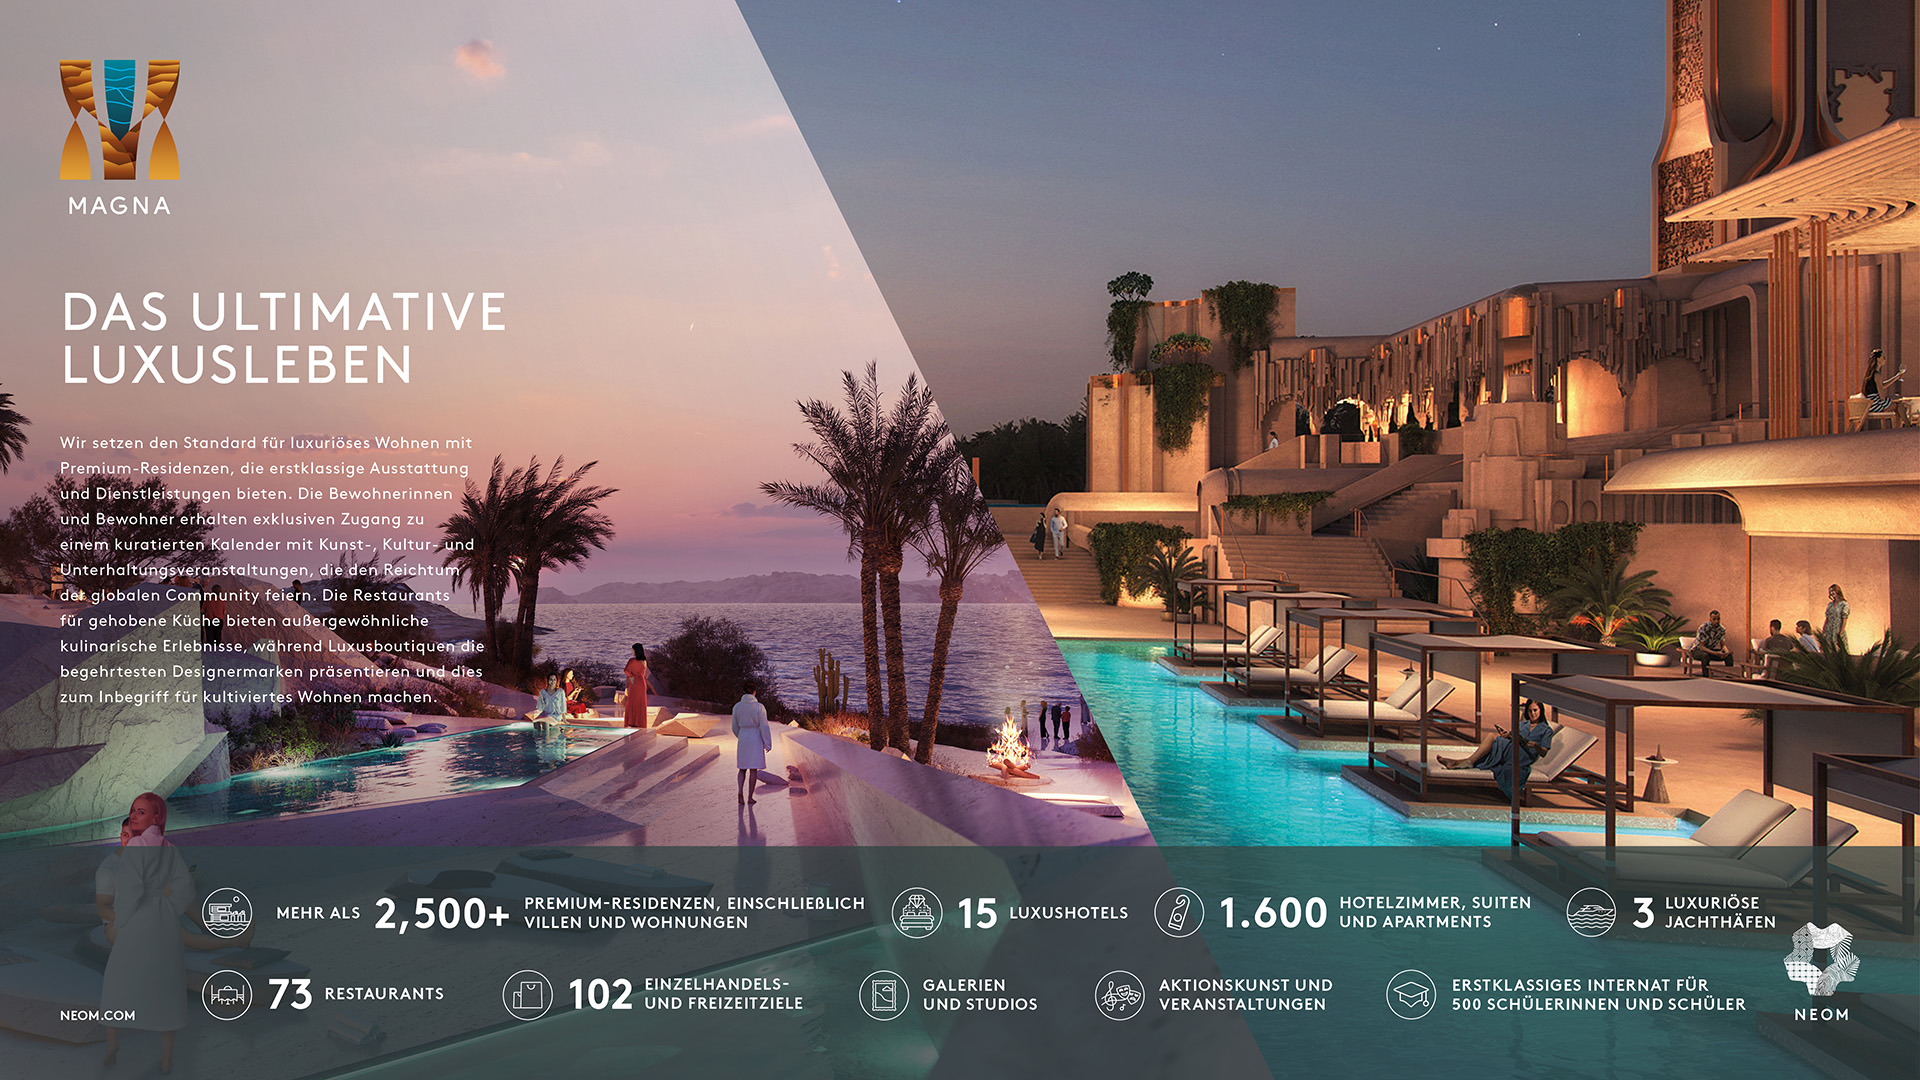 MAGNA Infographic - The Ultimate in Luxury Living